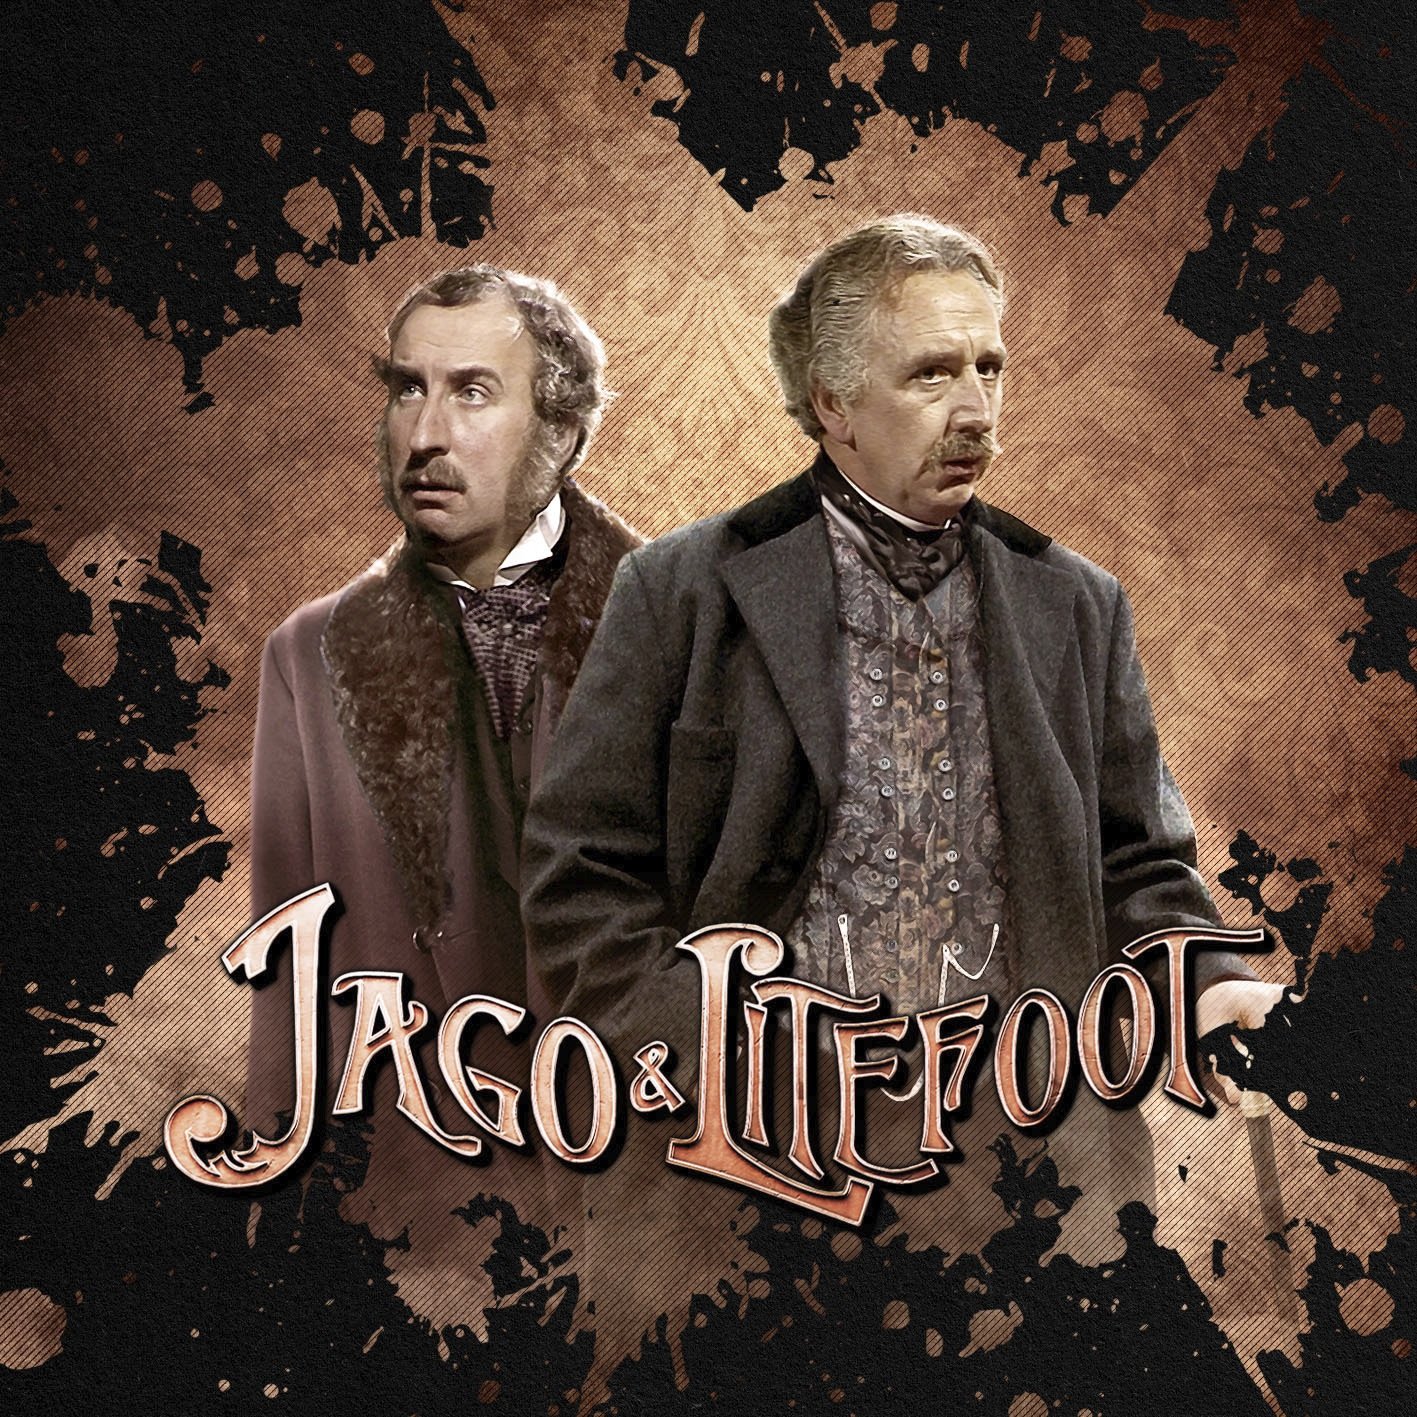 Big Finish Announces Free Weekly Downloads and Discounts, Starting with Jago & Litefoot!